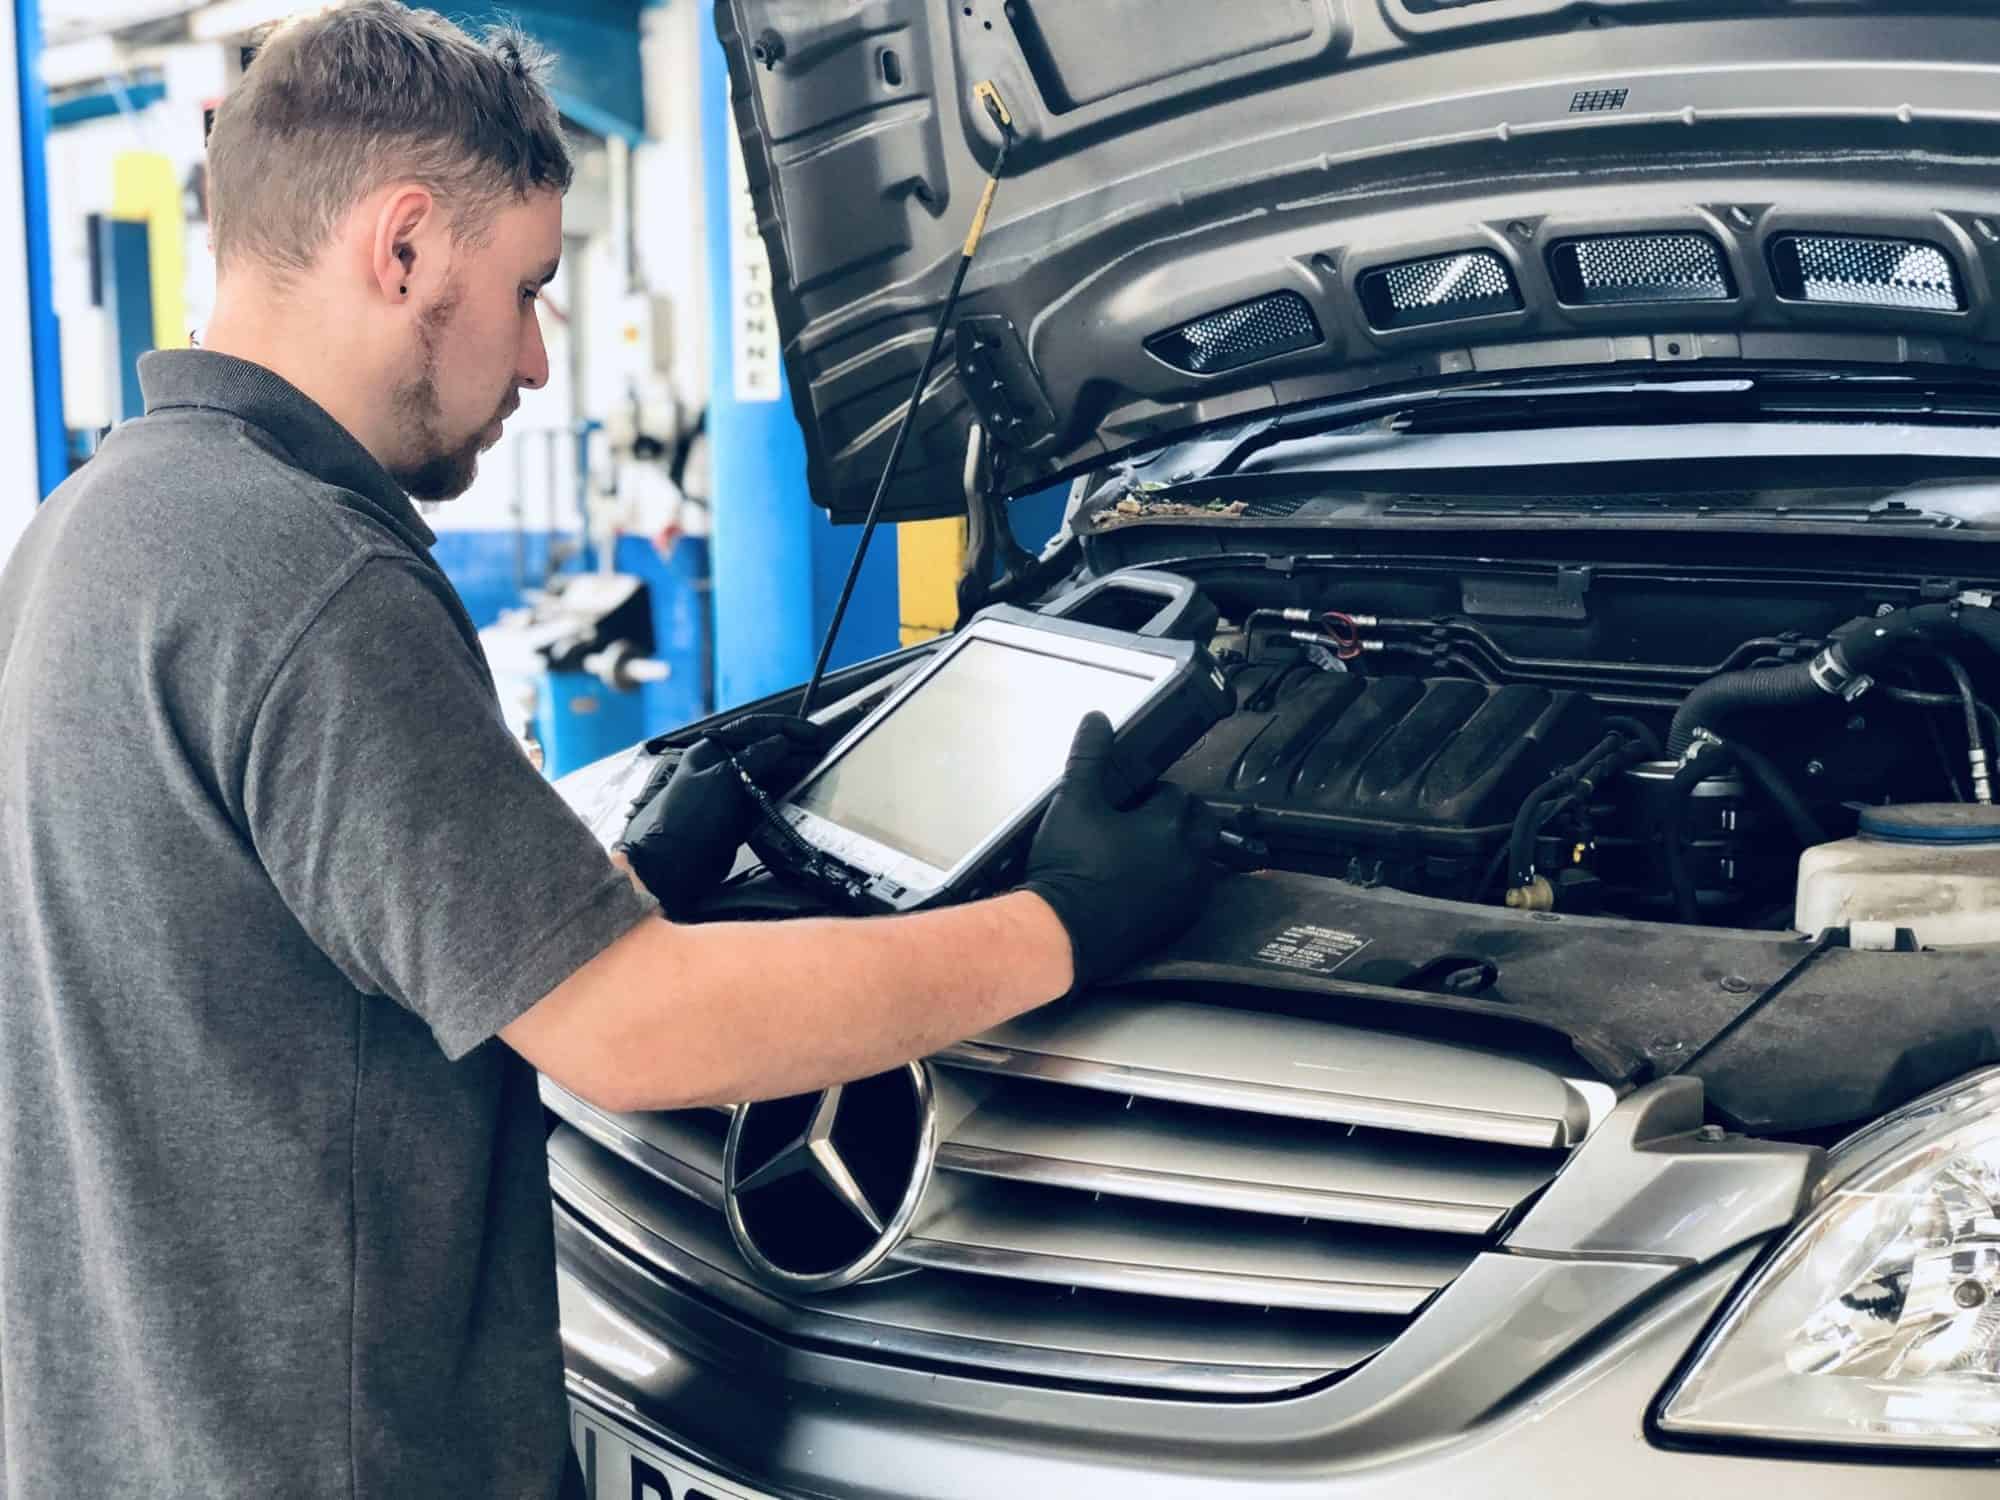 A mechanic is inspecting Mercedes Benz car through diagnostic scanner